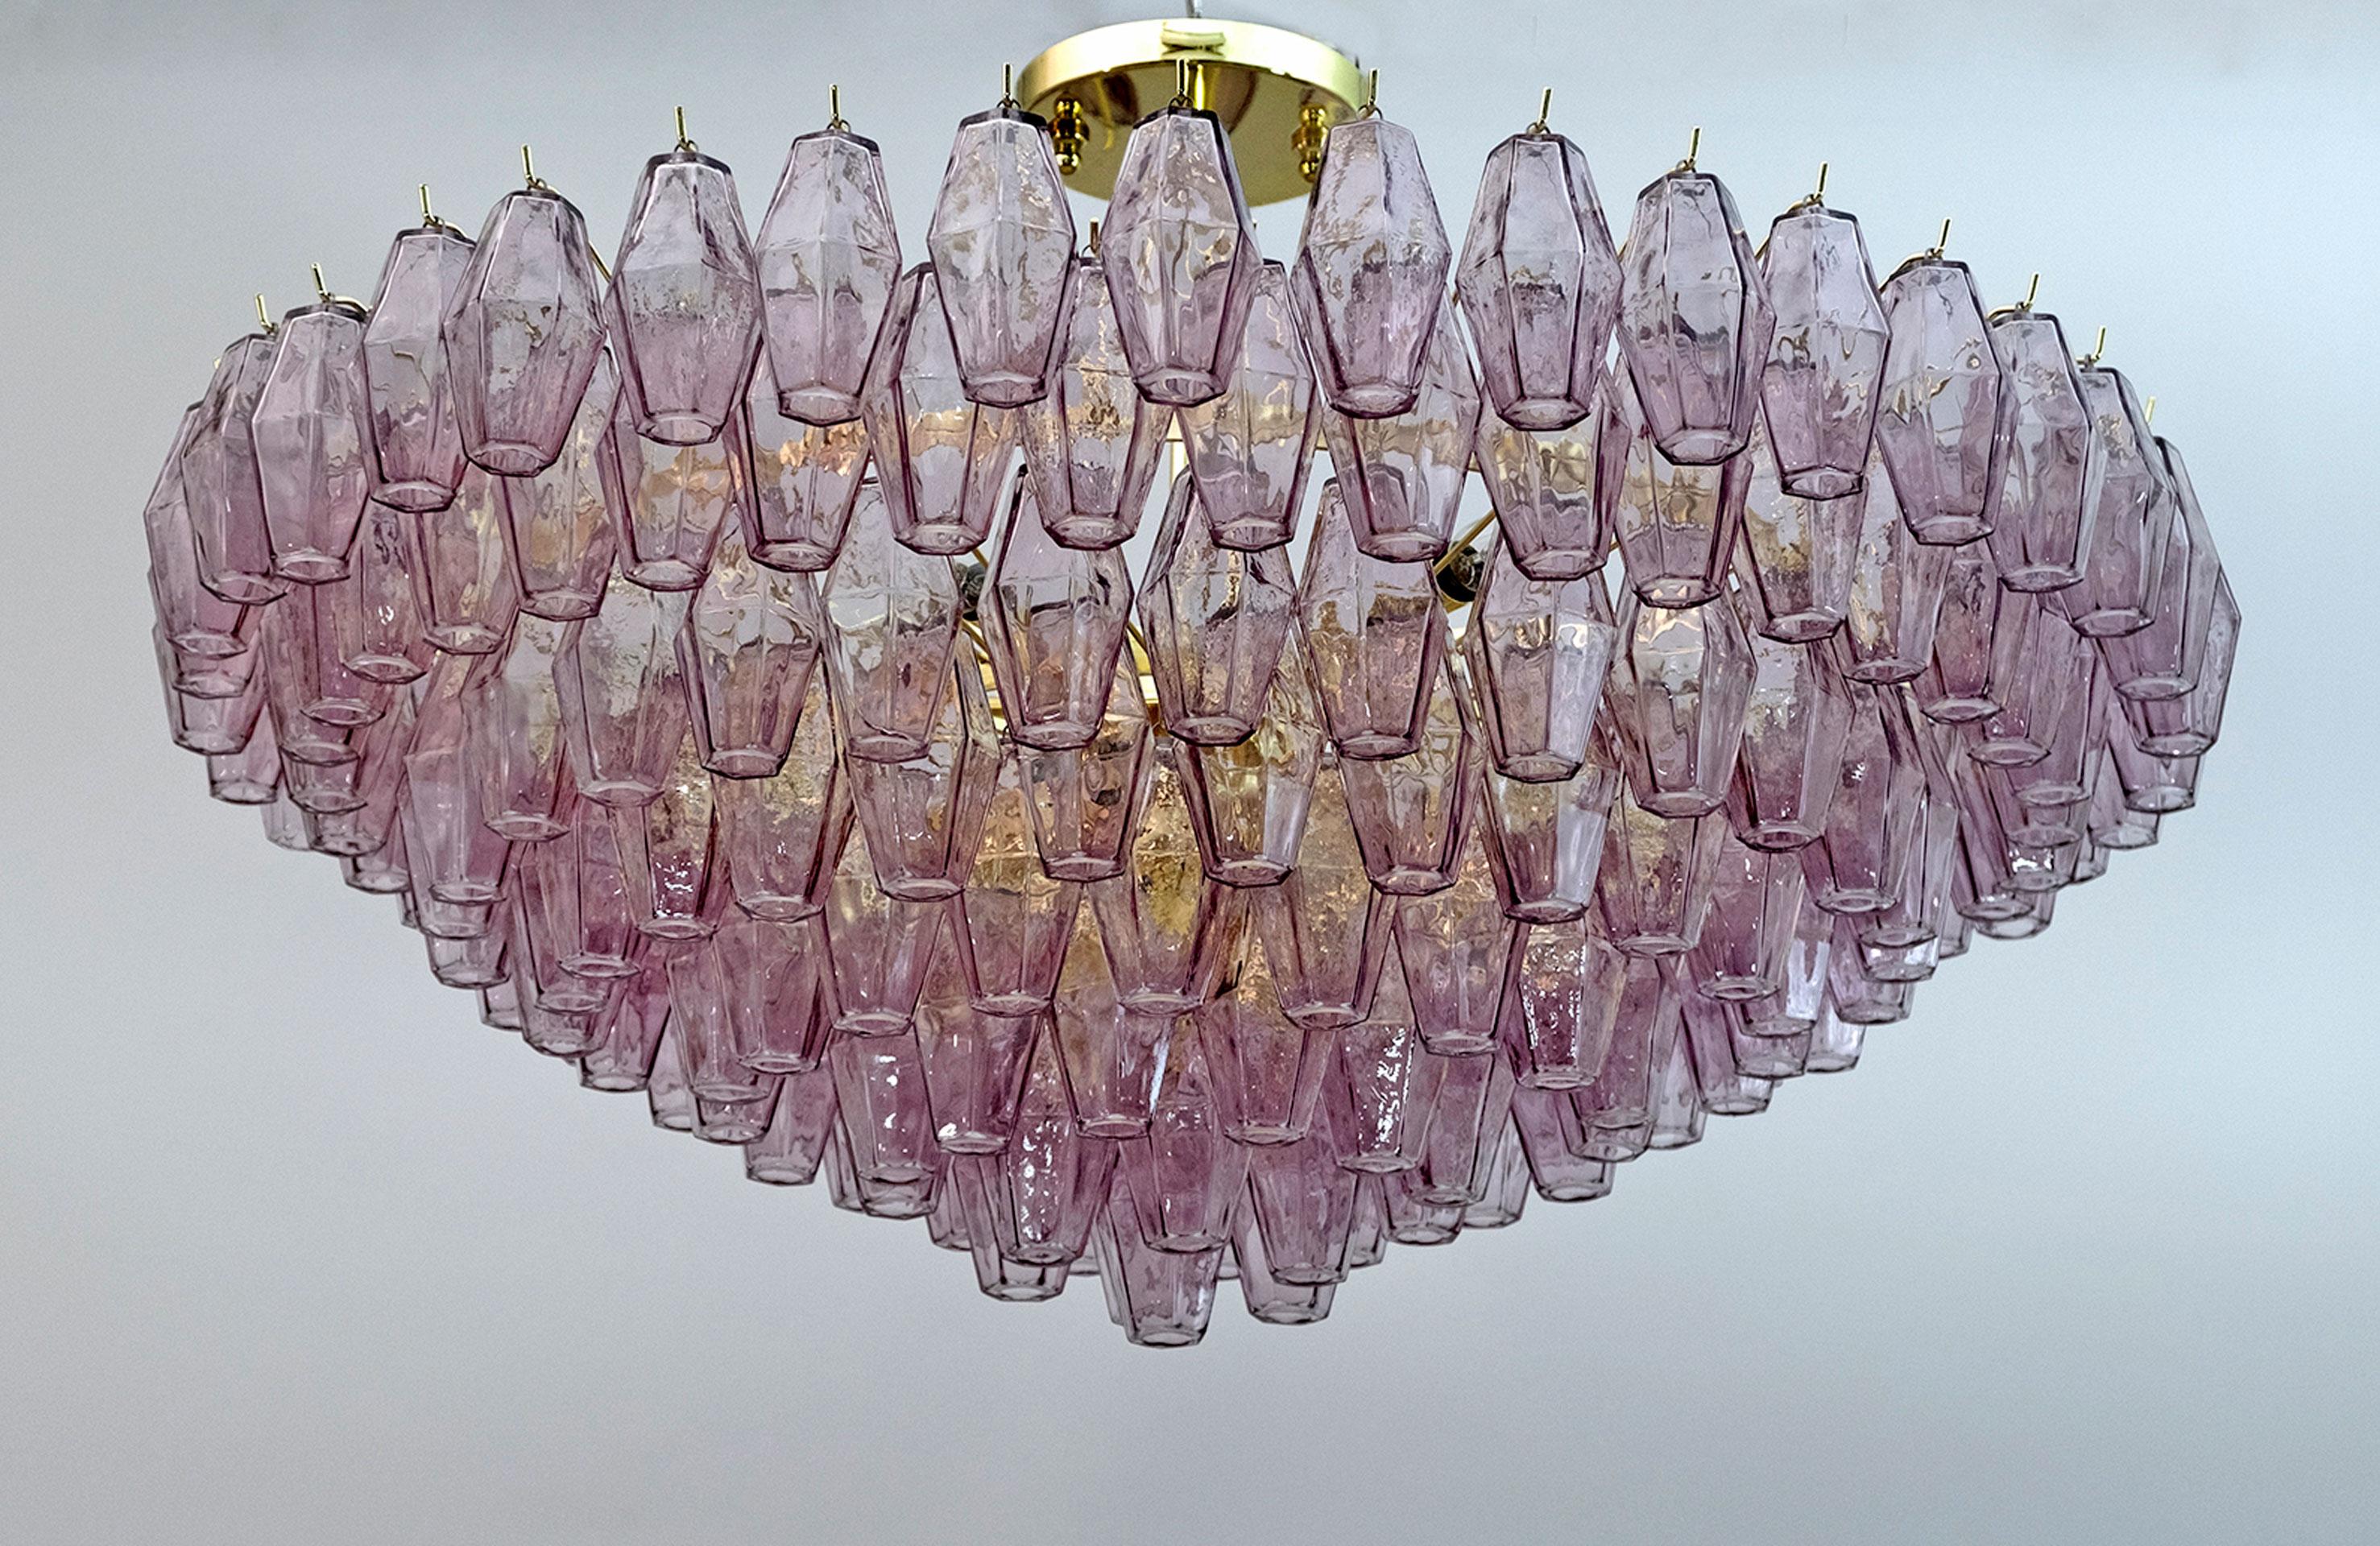 Italian chandelier from the island of Murano. This piece has a brass frame that supports an impressive array of 178 Murano glass, eggplant-colored, polyhedral shaped pieces. Illuminated by 13 E14 bulbs (for the USA we supply E12 adapters). The